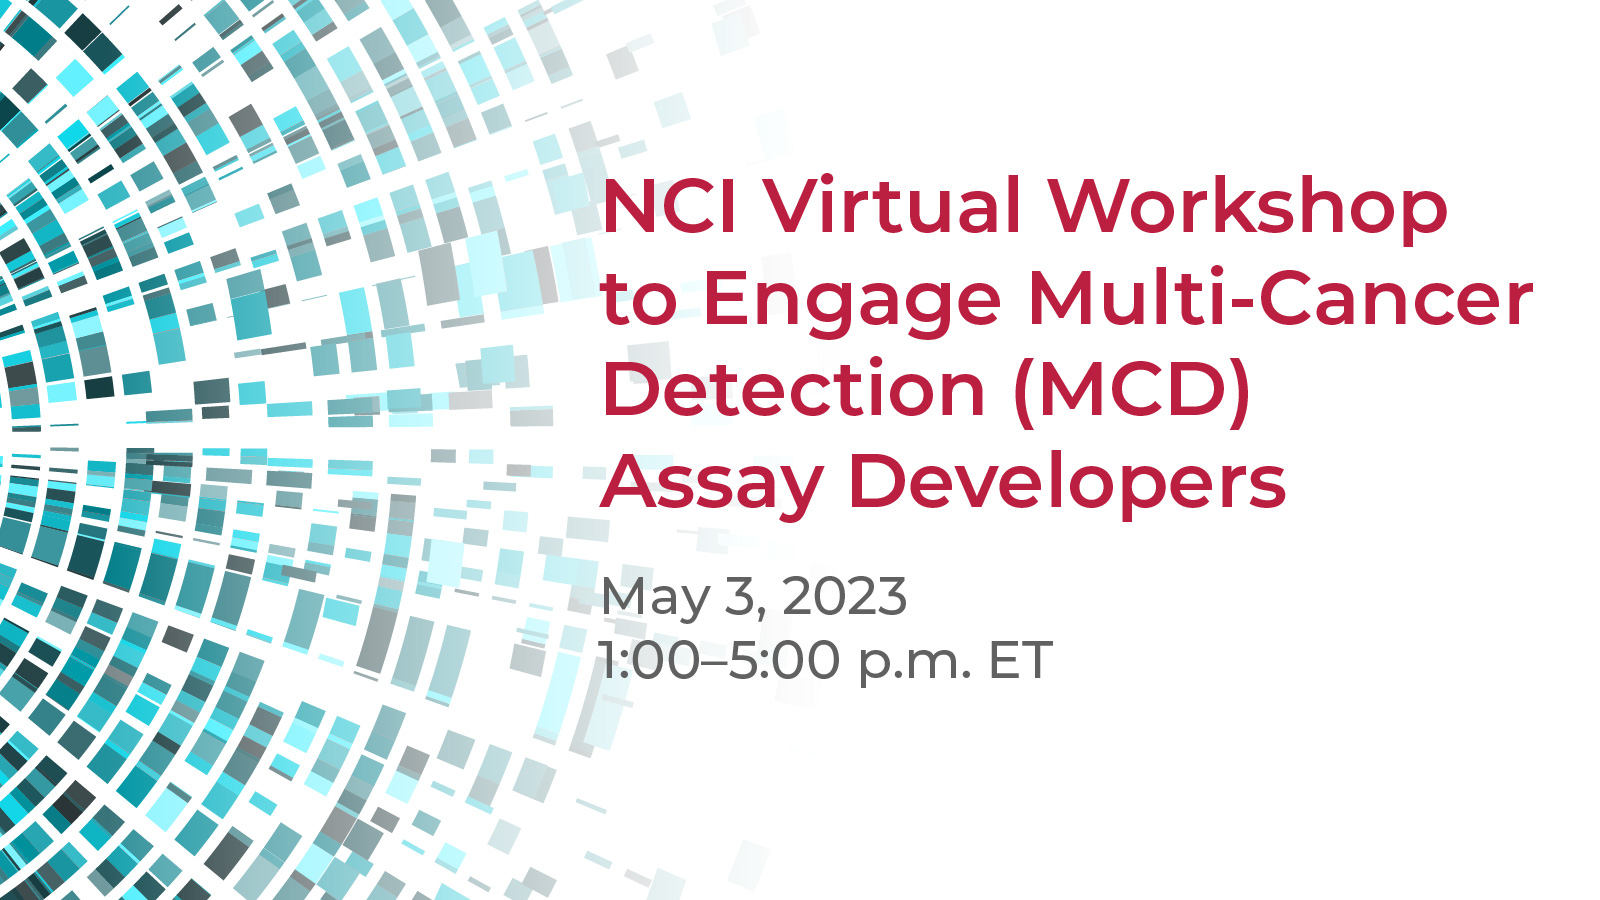 Register for the NCI Virtual Workshop to Engage Multi-Cancer Detection (MDC) Assay Developers